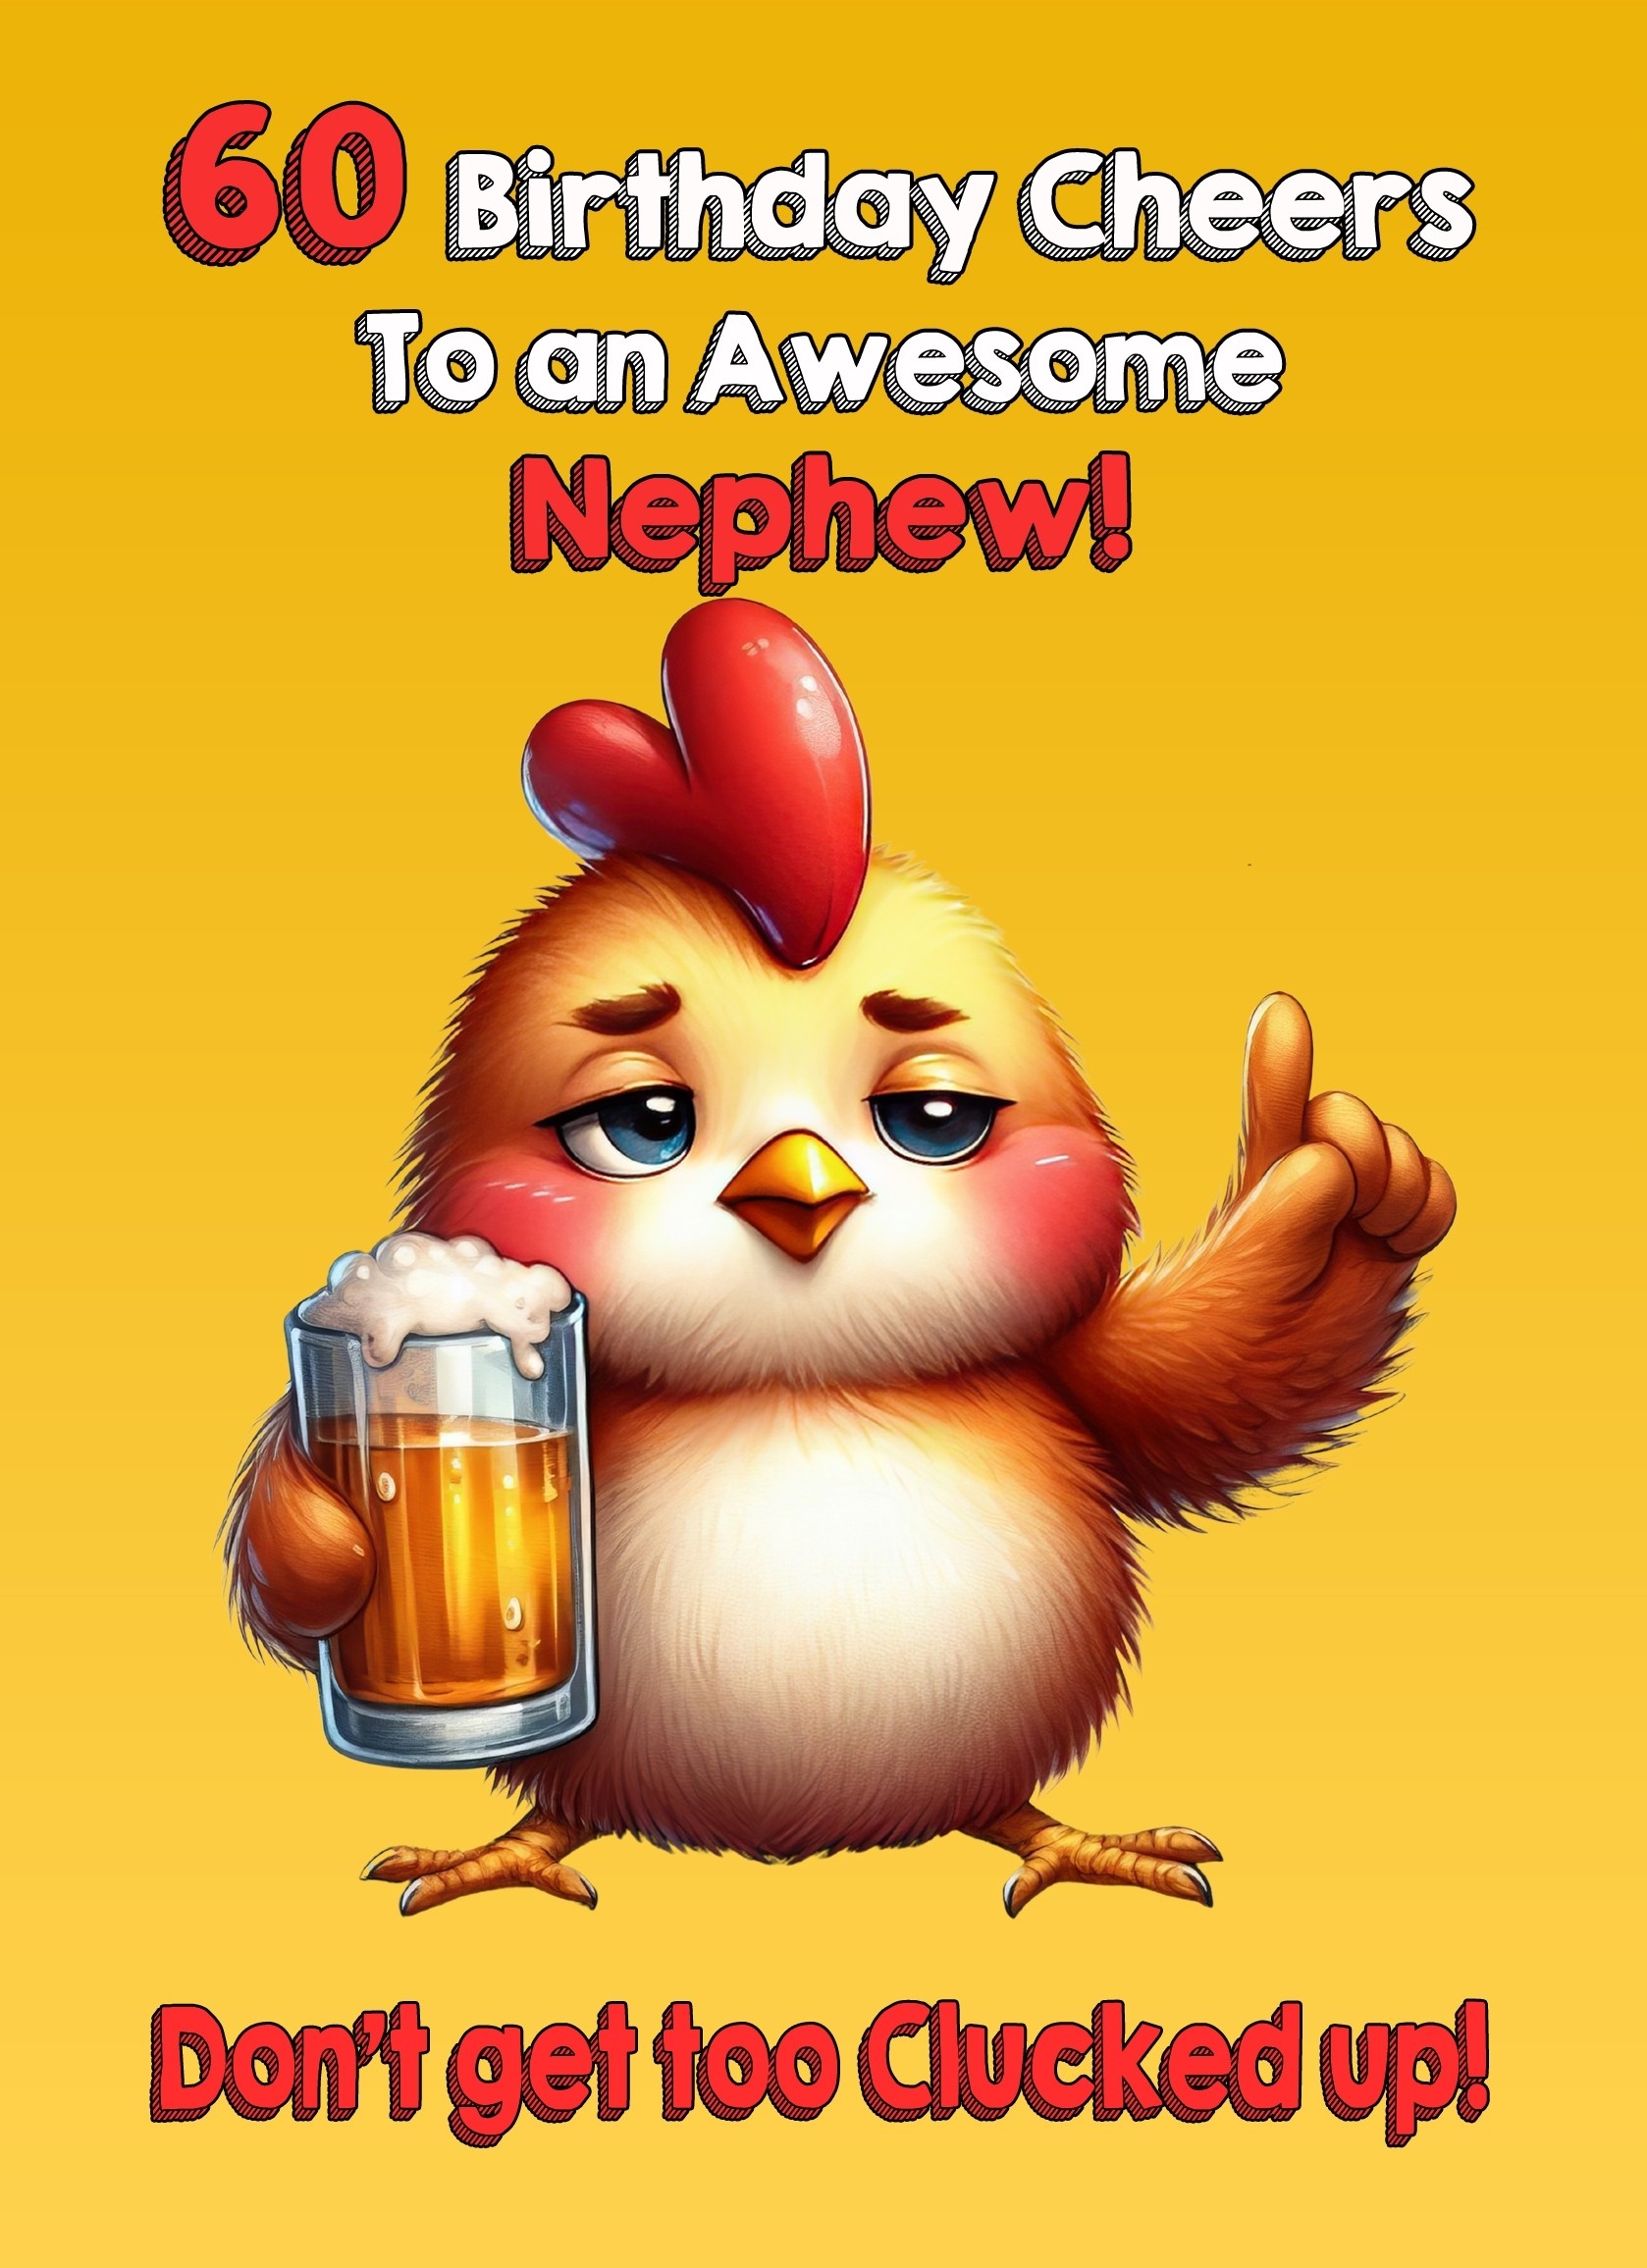 Nephew 60th Birthday Card (Funny Beer Chicken Humour)